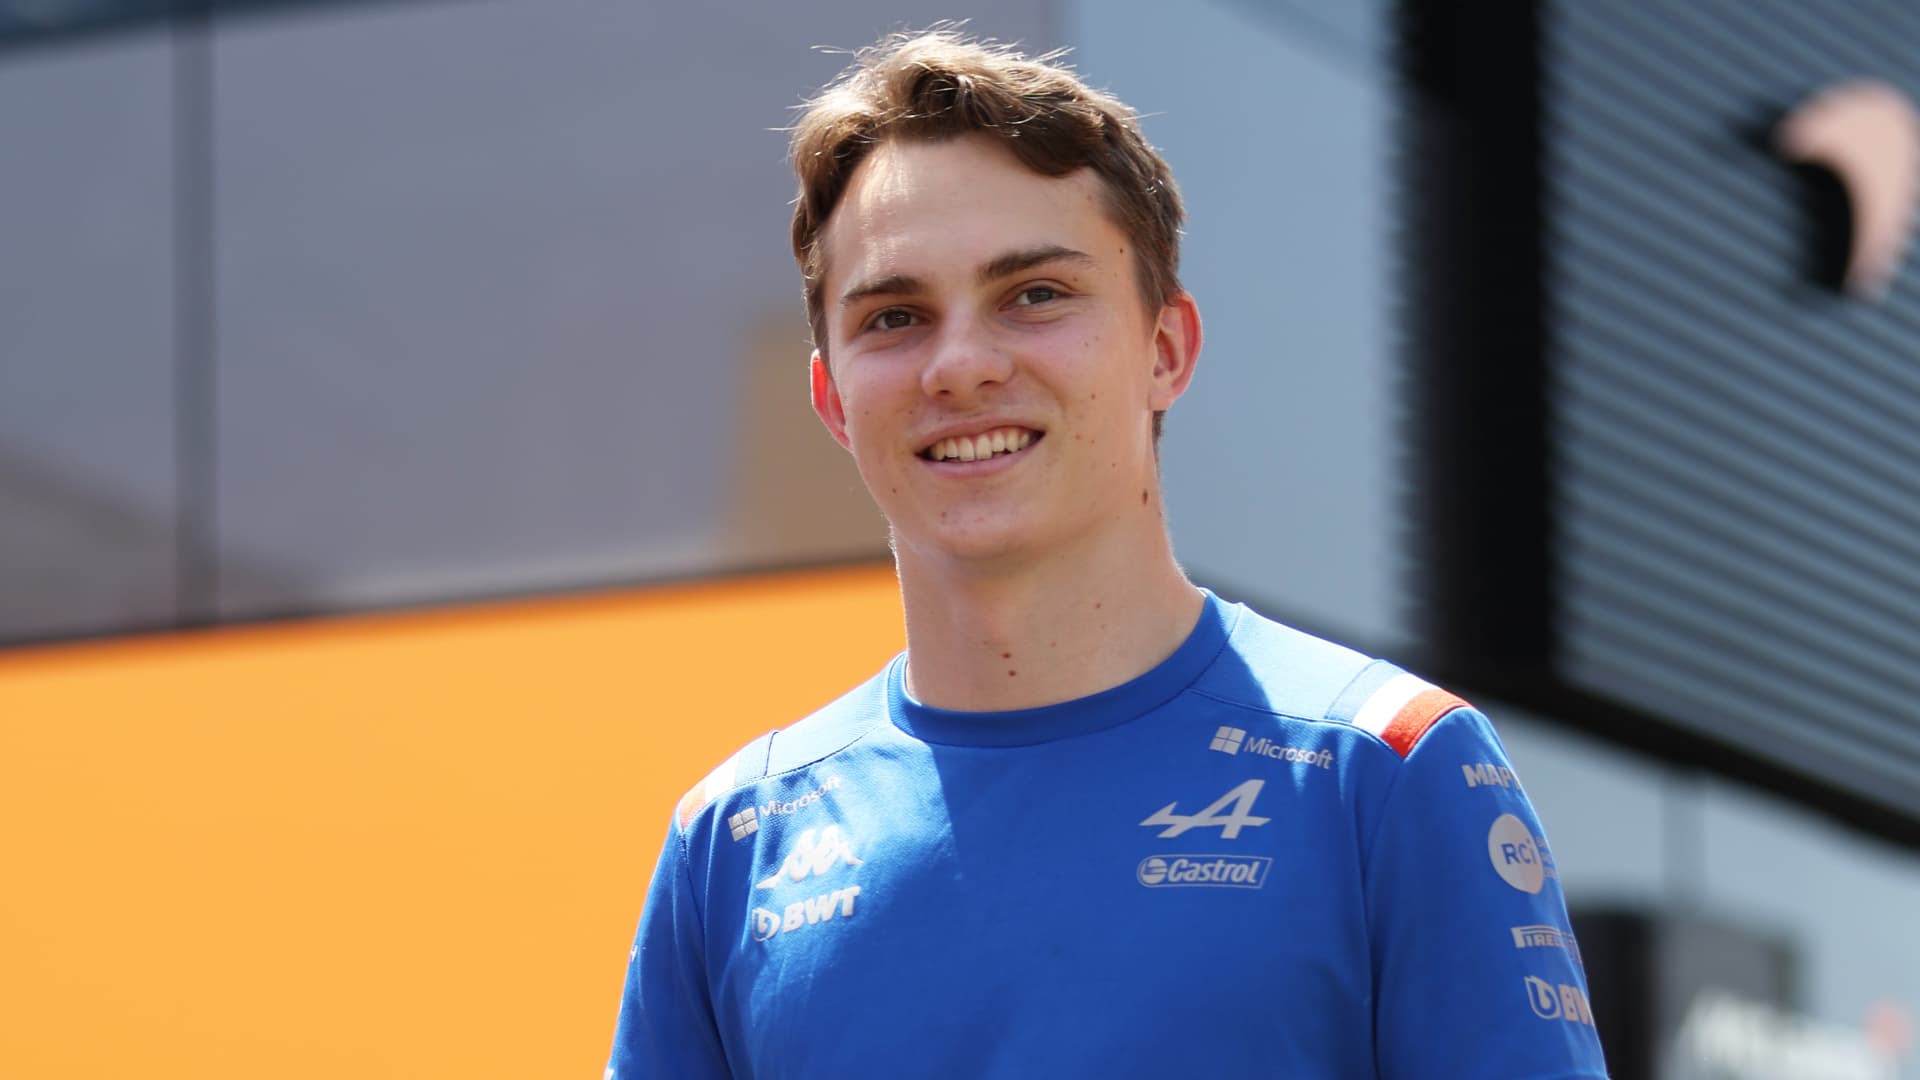 McLaren recently announced it will be replacing eight-time Grand Prix winner Daniel Ricciardo with 21-year-old Oscar Piastri (above).